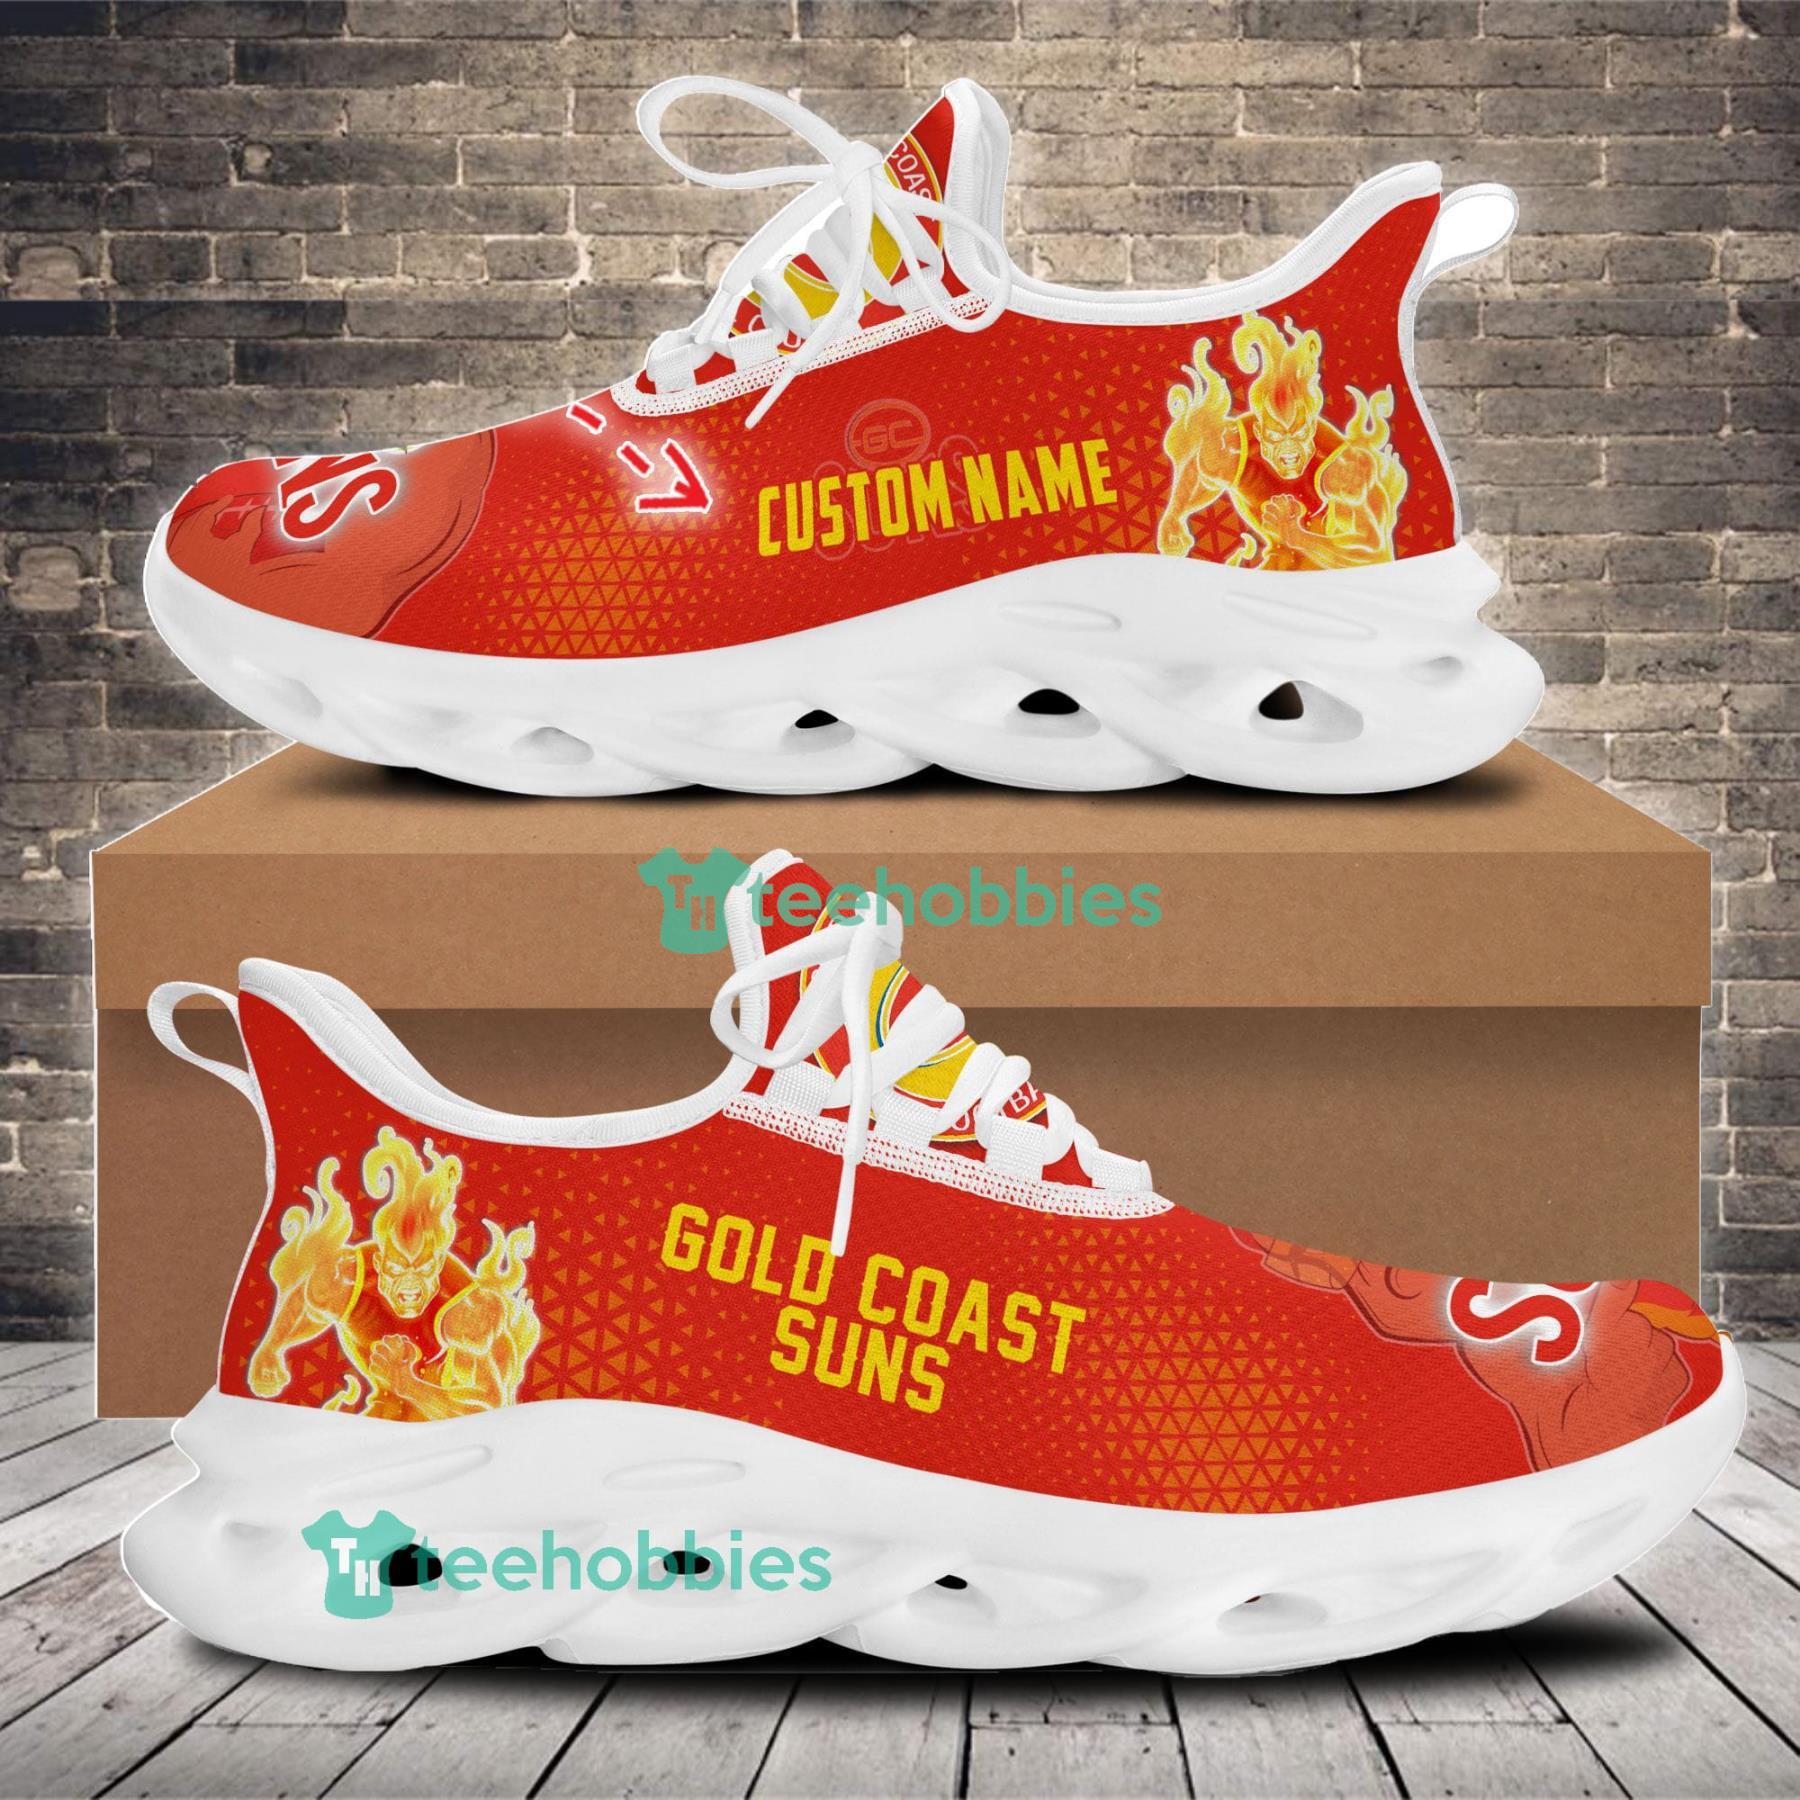 Gold Coast Suns Mascot Custom Name Sneakers Max Soul Shoes For Men And Women Afl Sneakers Product Photo 1